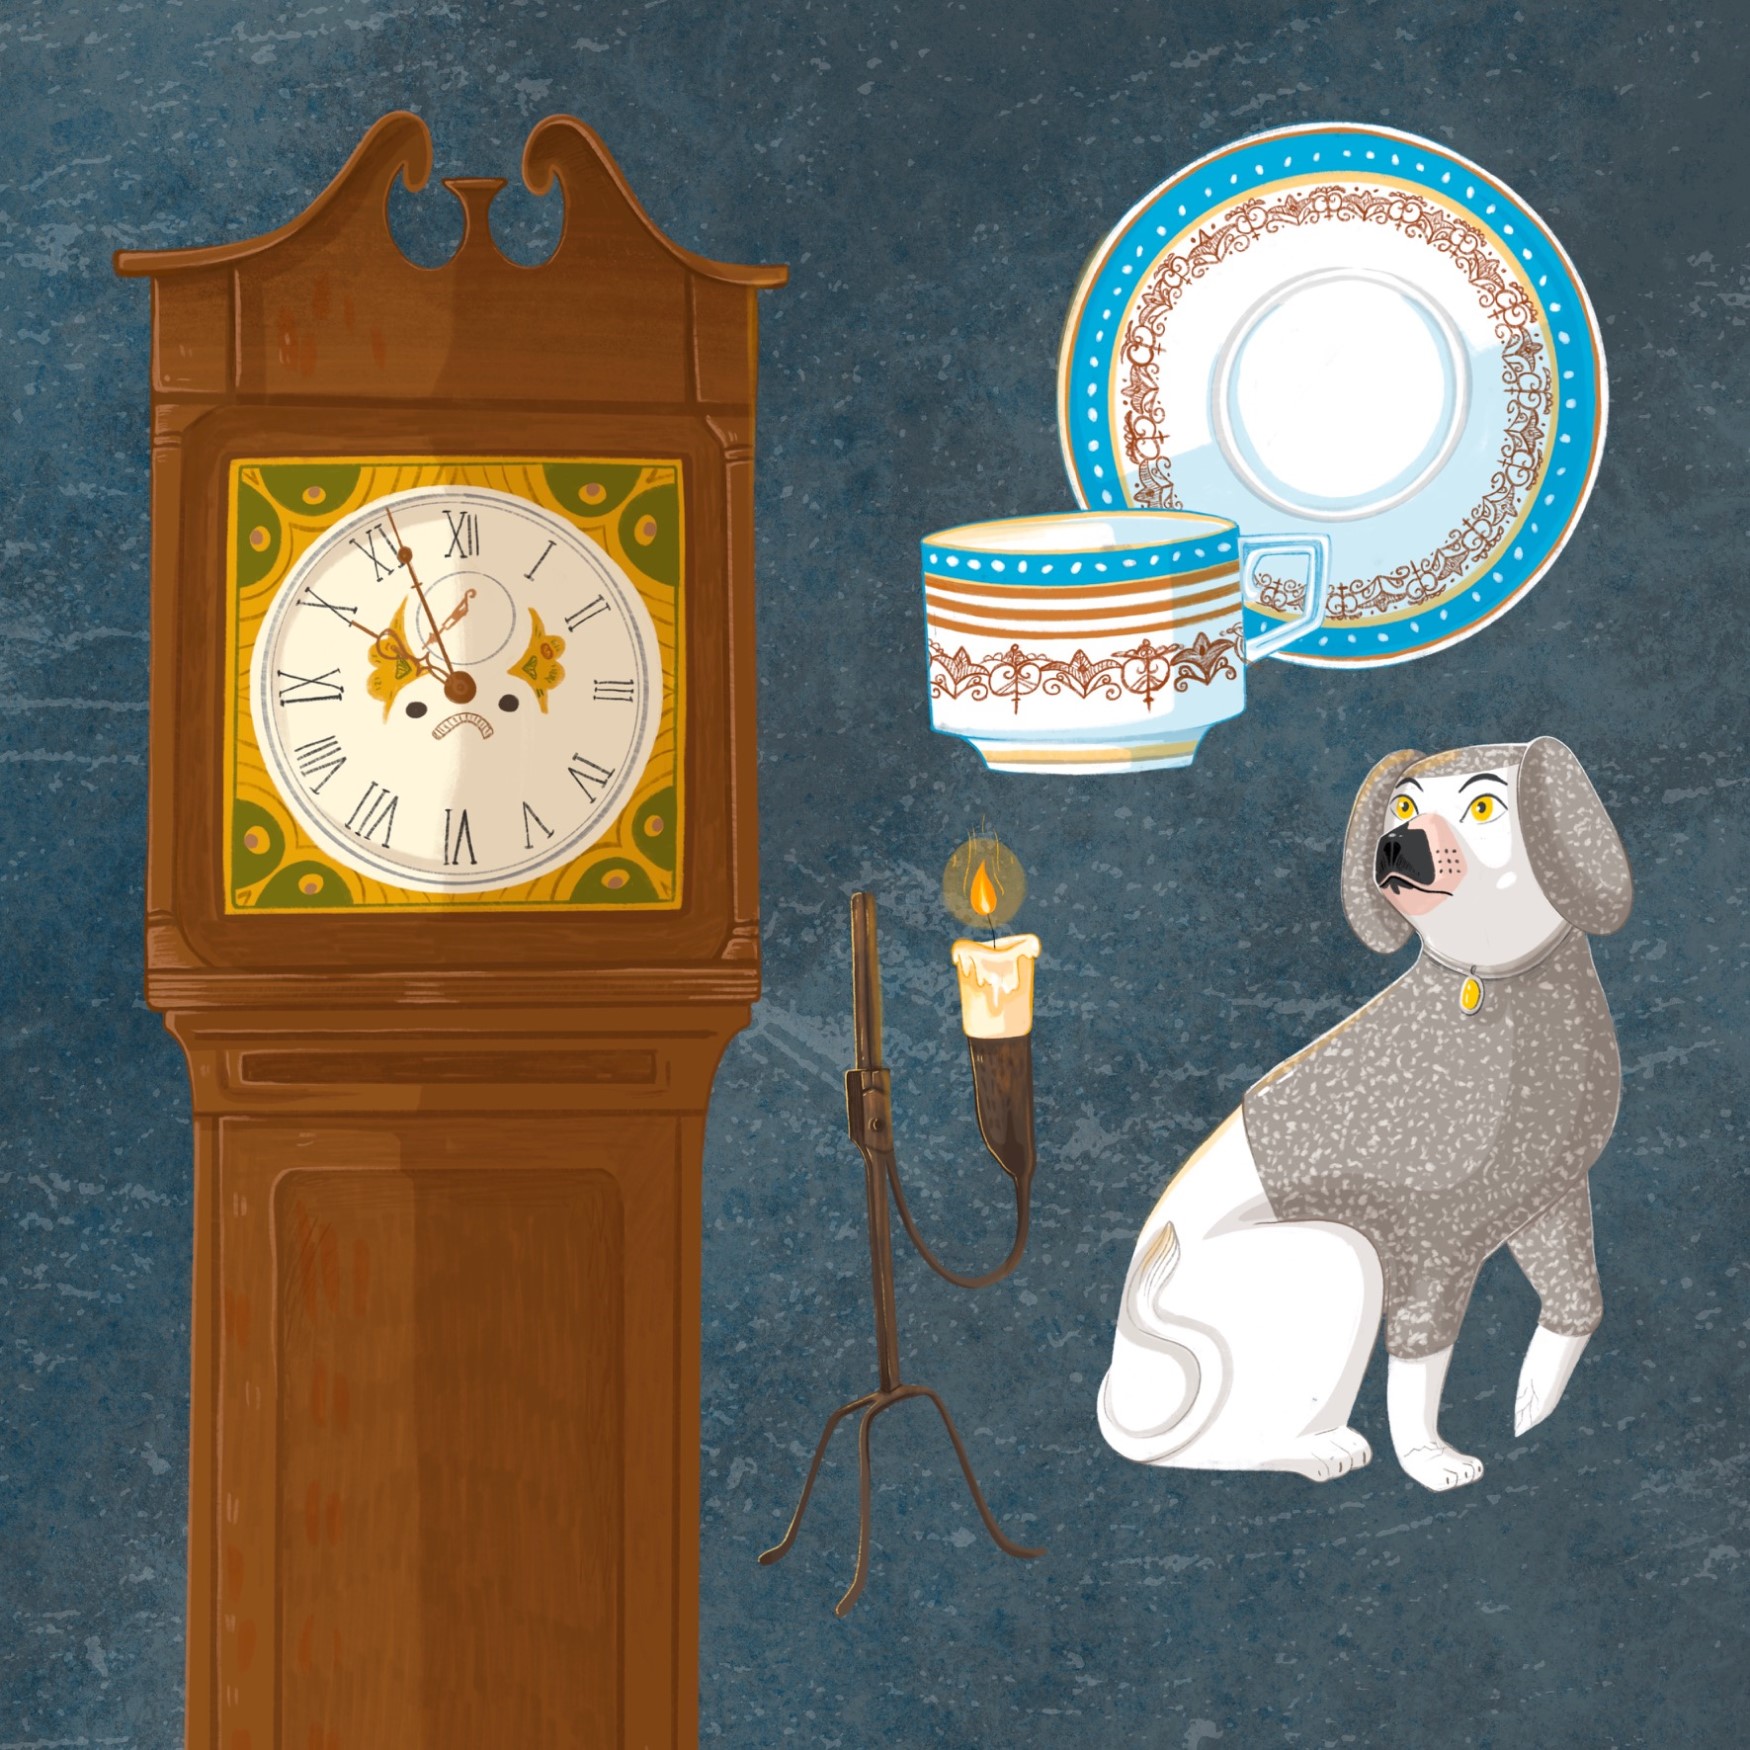 Image of clock, cup and saucer, candlestick and dog